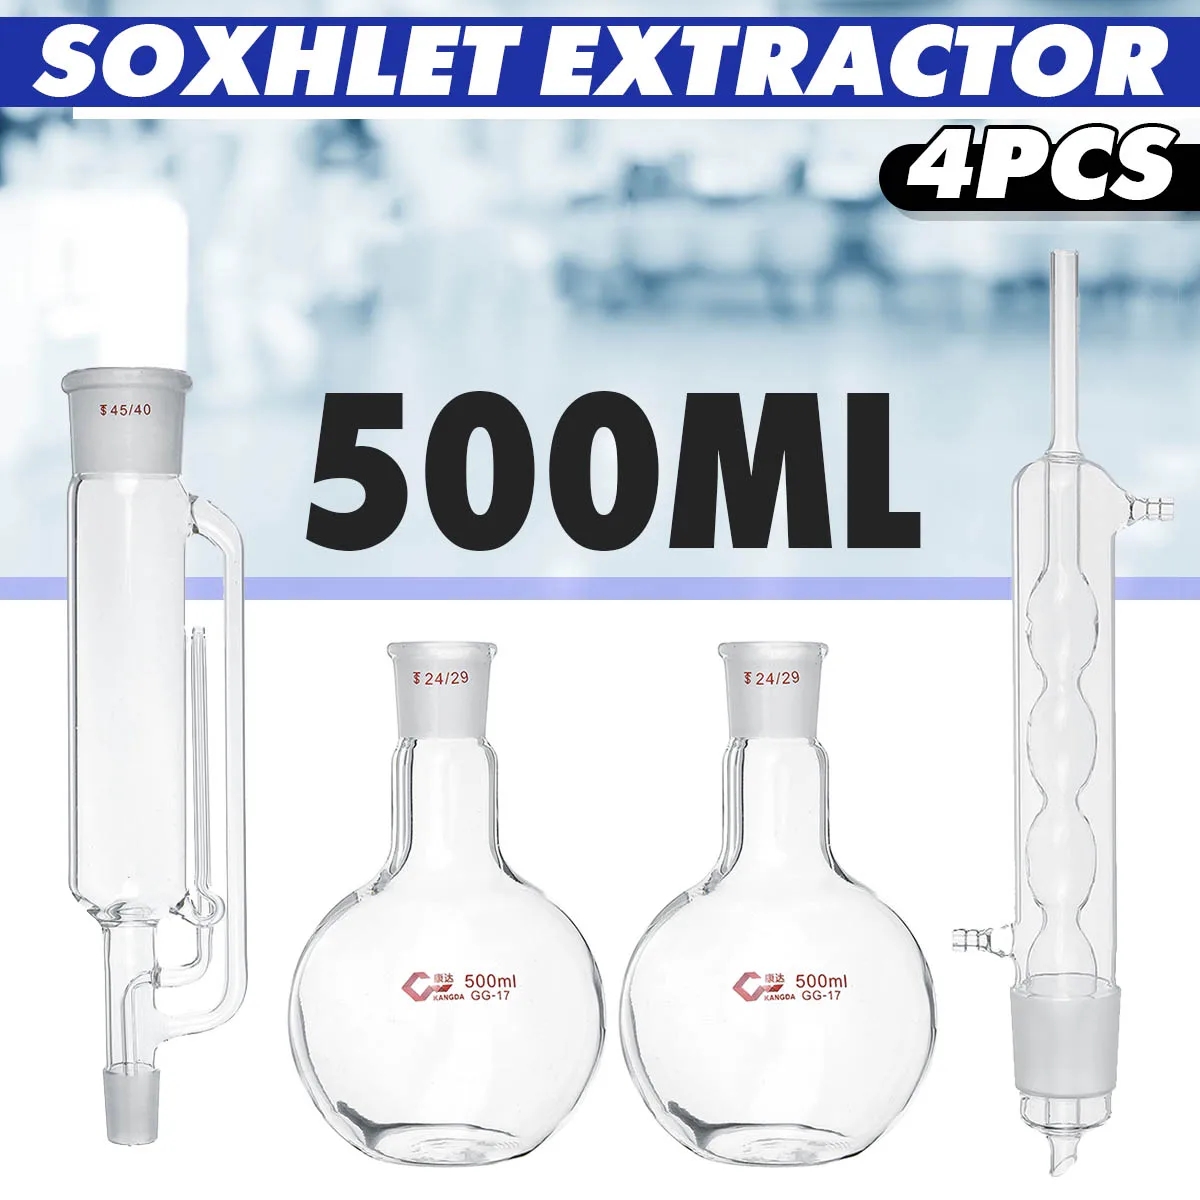 4Pcs/set 500ml Lab Glass Soxhlet Extractor Condenser Set with Two 24/29 Flat Bottom Flask 305MM 45/40 Tube Lab Glassware Kit